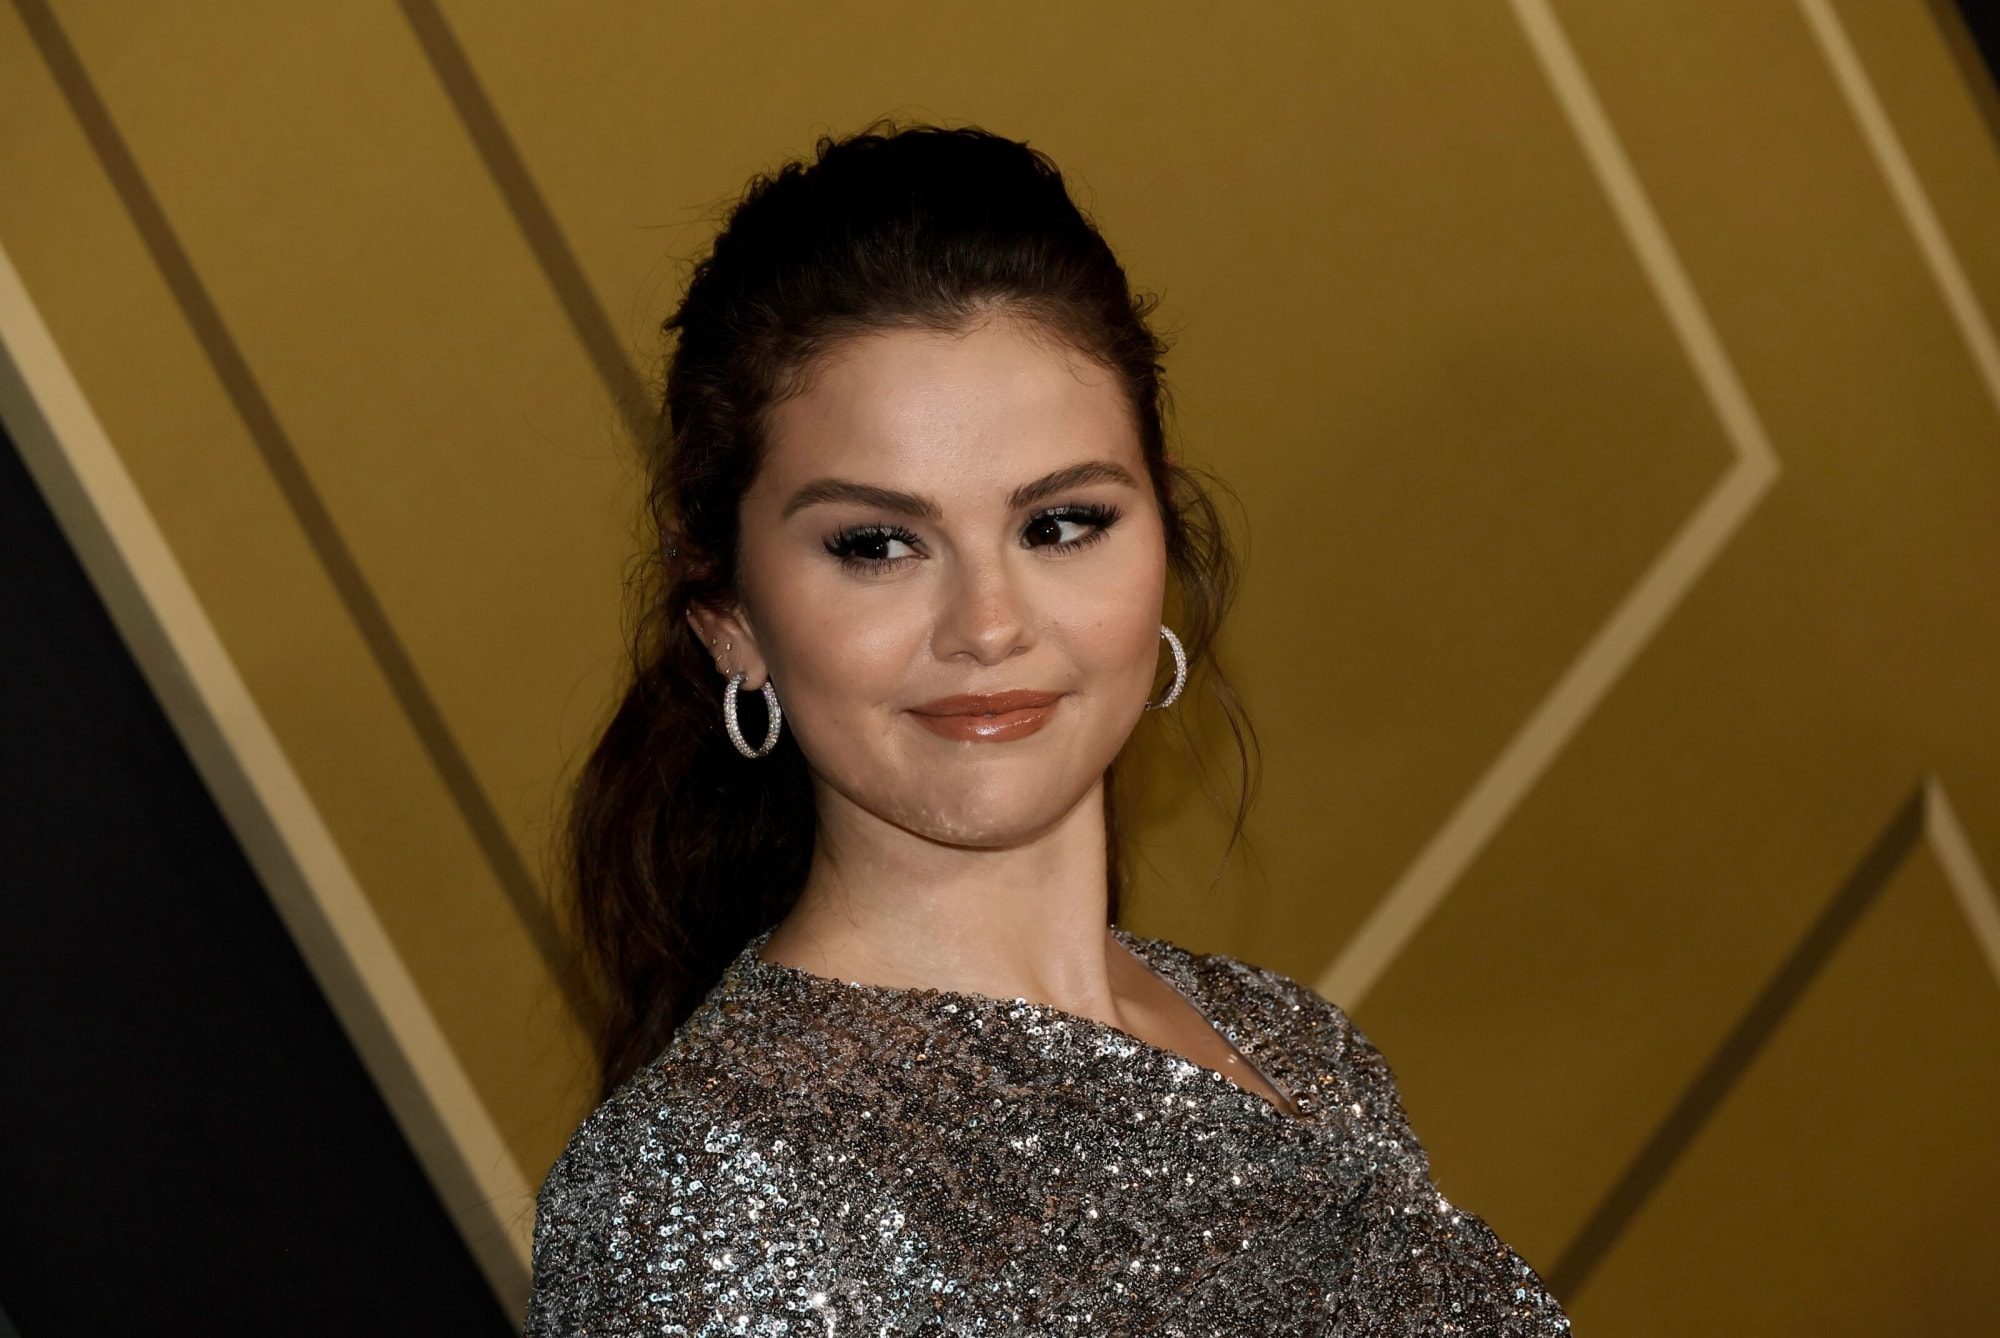 What time is the Selena Gomez documentary streaming on Apple TV+?